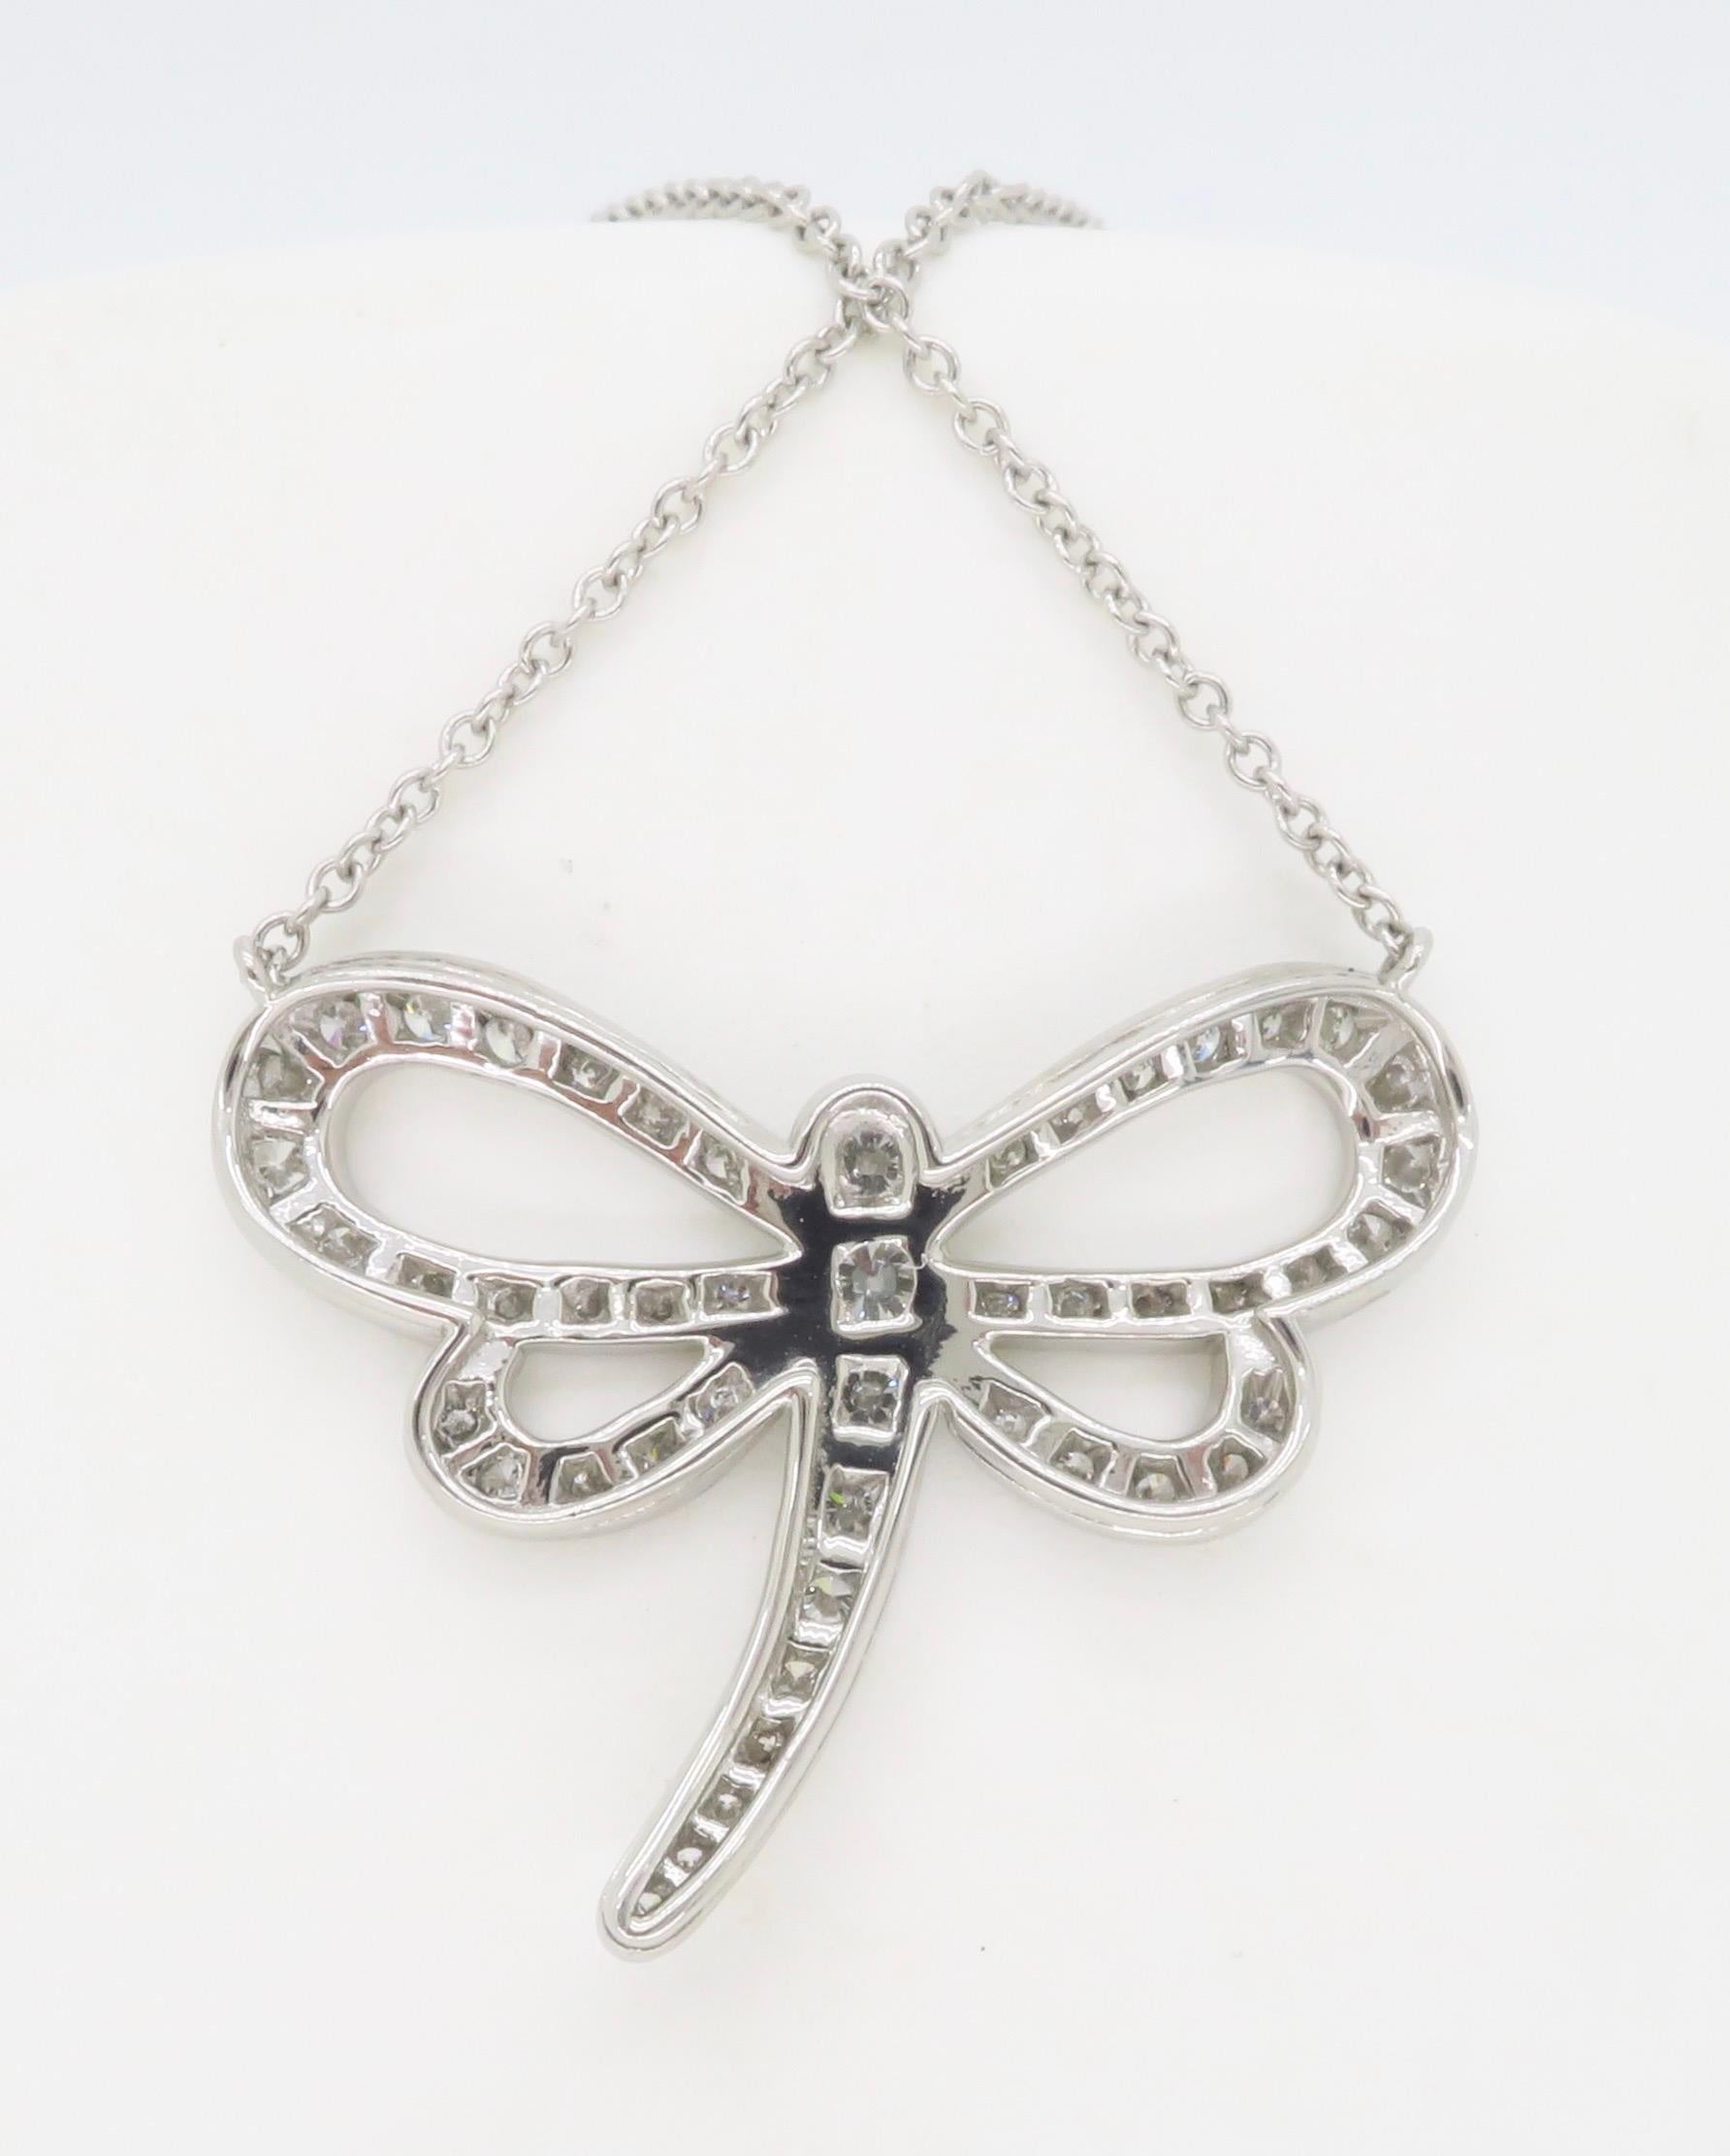 Rare Tiffany & Co. Diamond Dragonfly Necklace made in Platinum  3